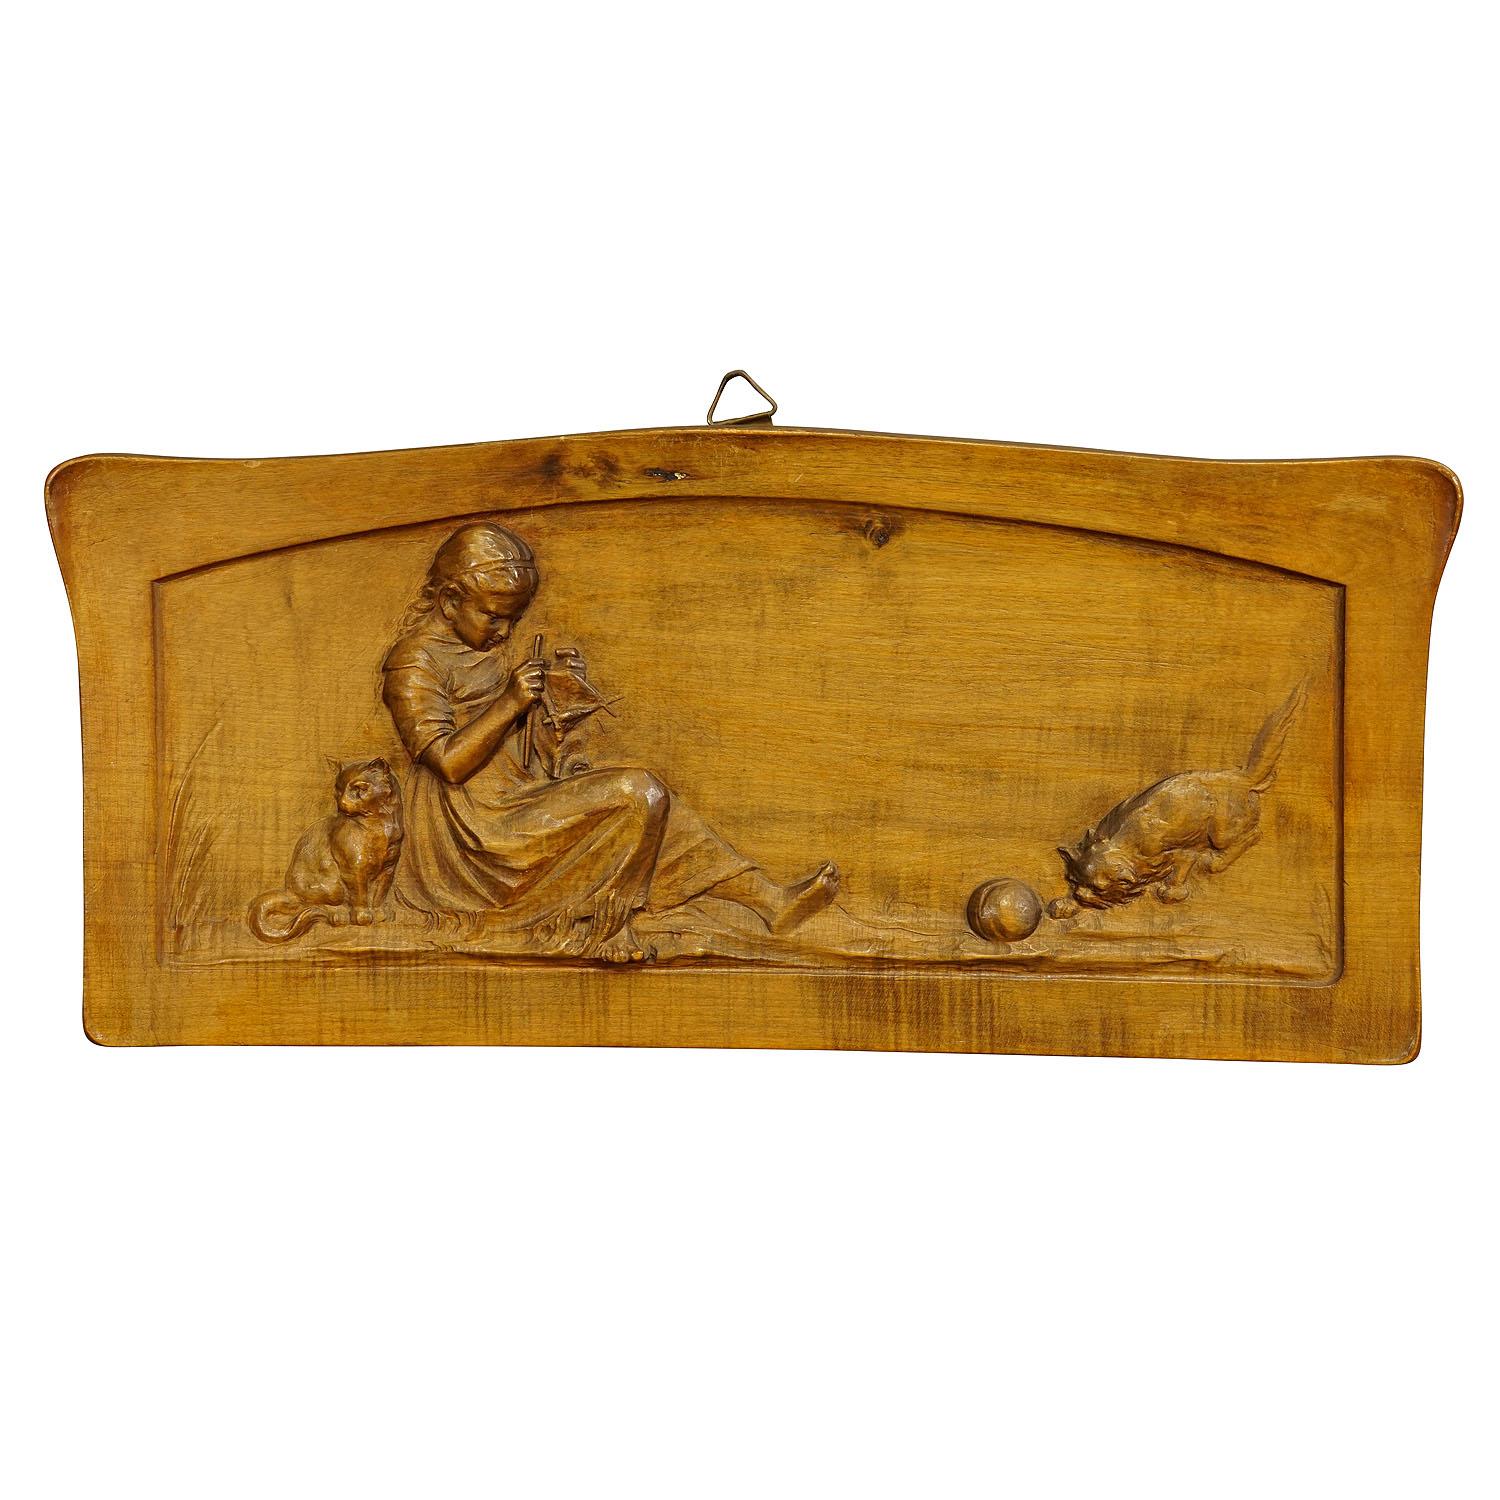 Wall Relief wood carving with farmer girl and kitten ca. 1900

A wooden carved wall relief depicting a knitting farmer girl in folksy costume with her kitten. Finely carved in lindenwood in Germany circa 1900. A very nice log cabin wall